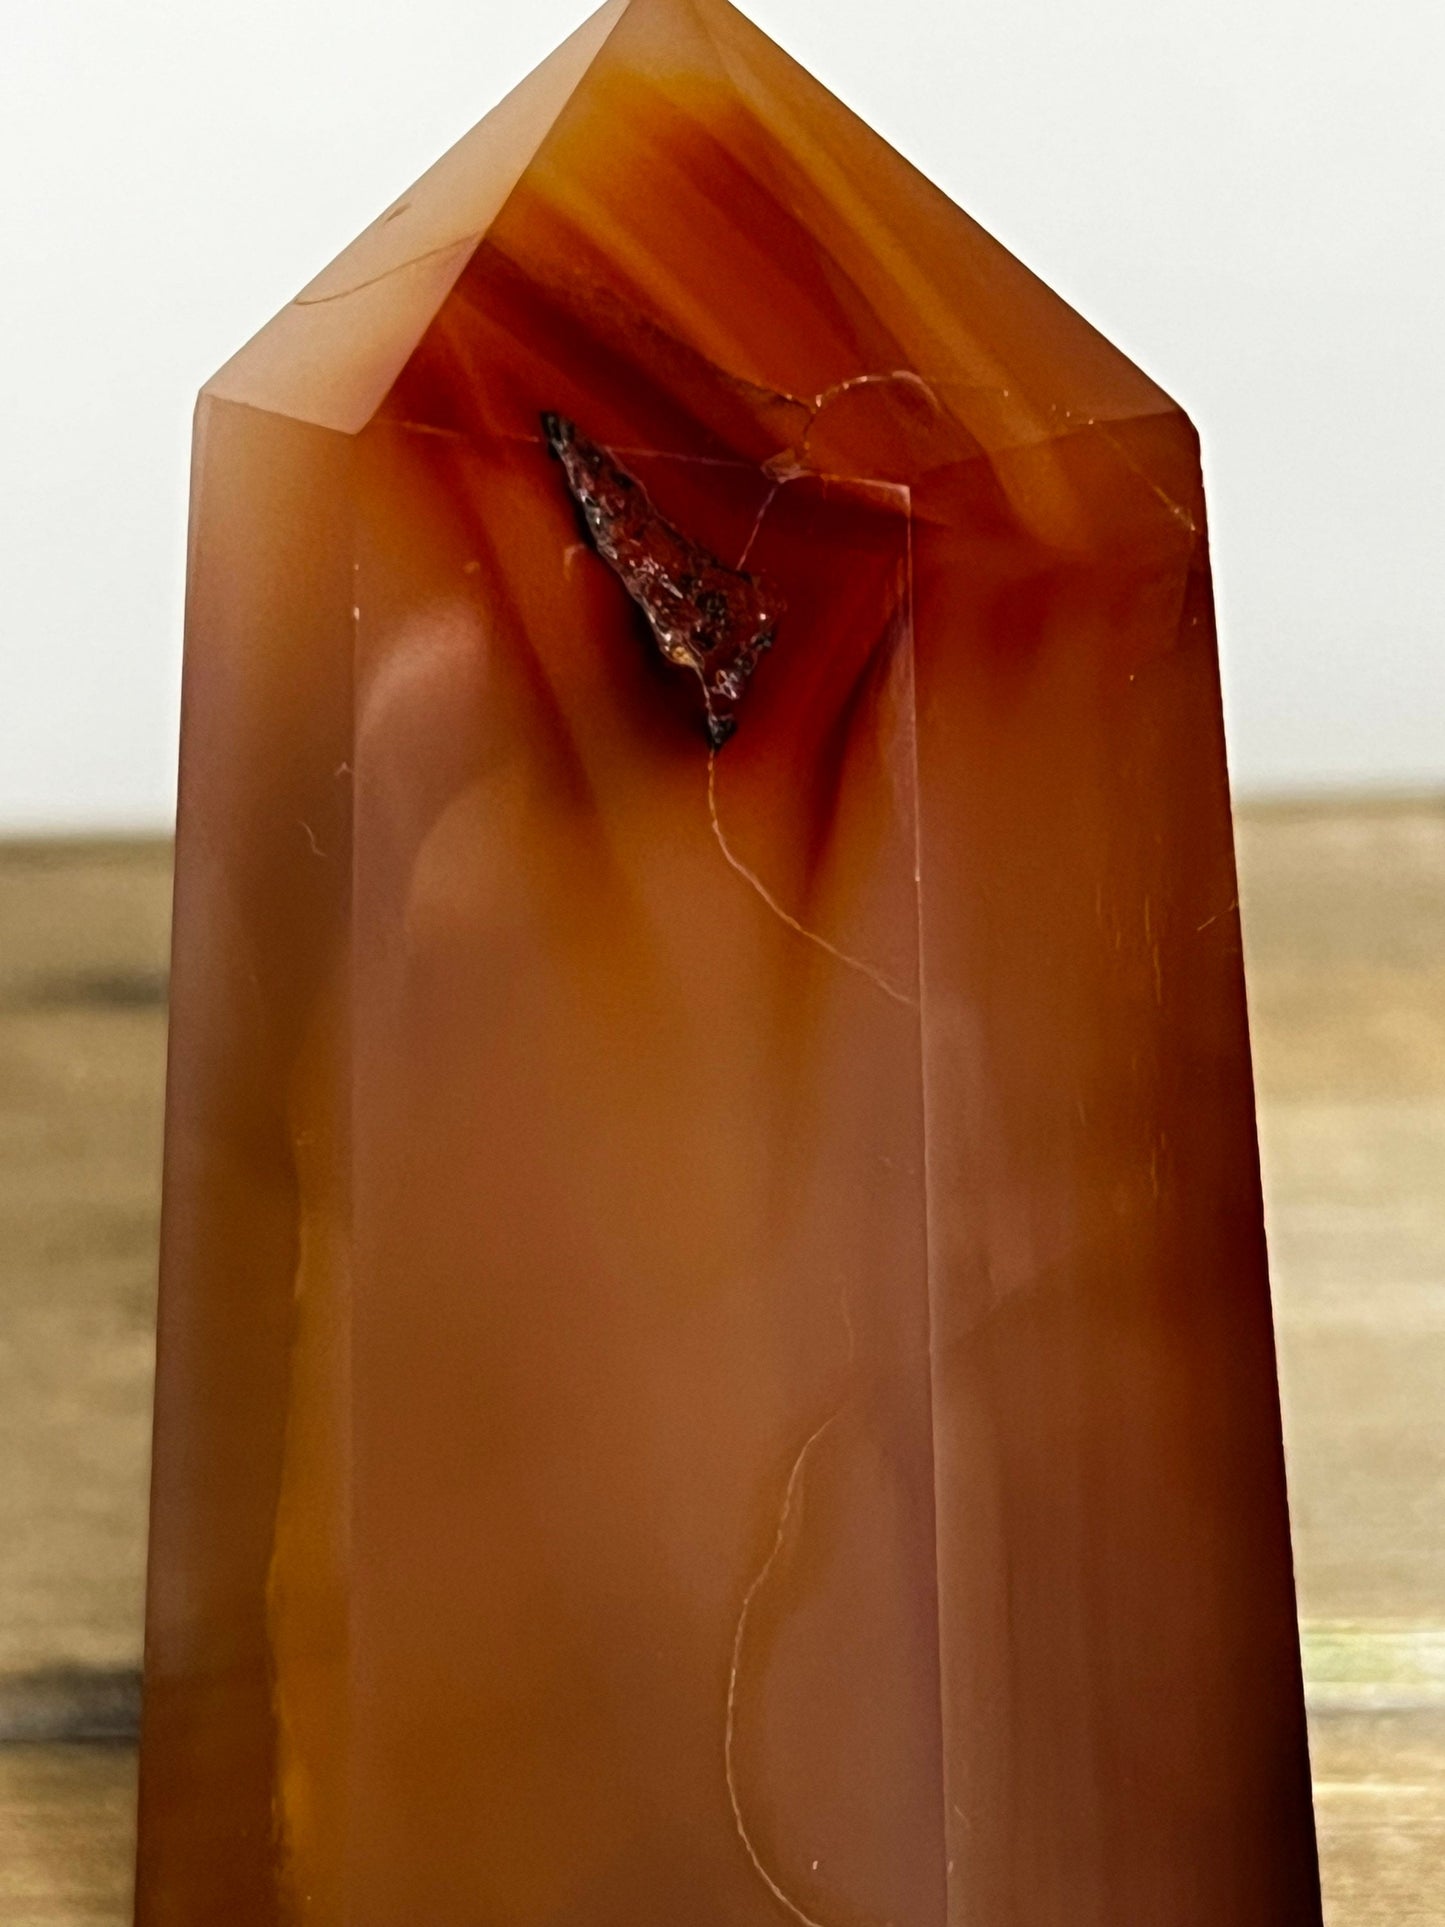 Carnelian Tower | Red Banded Carnelian Agate Tower 4.06” Tall